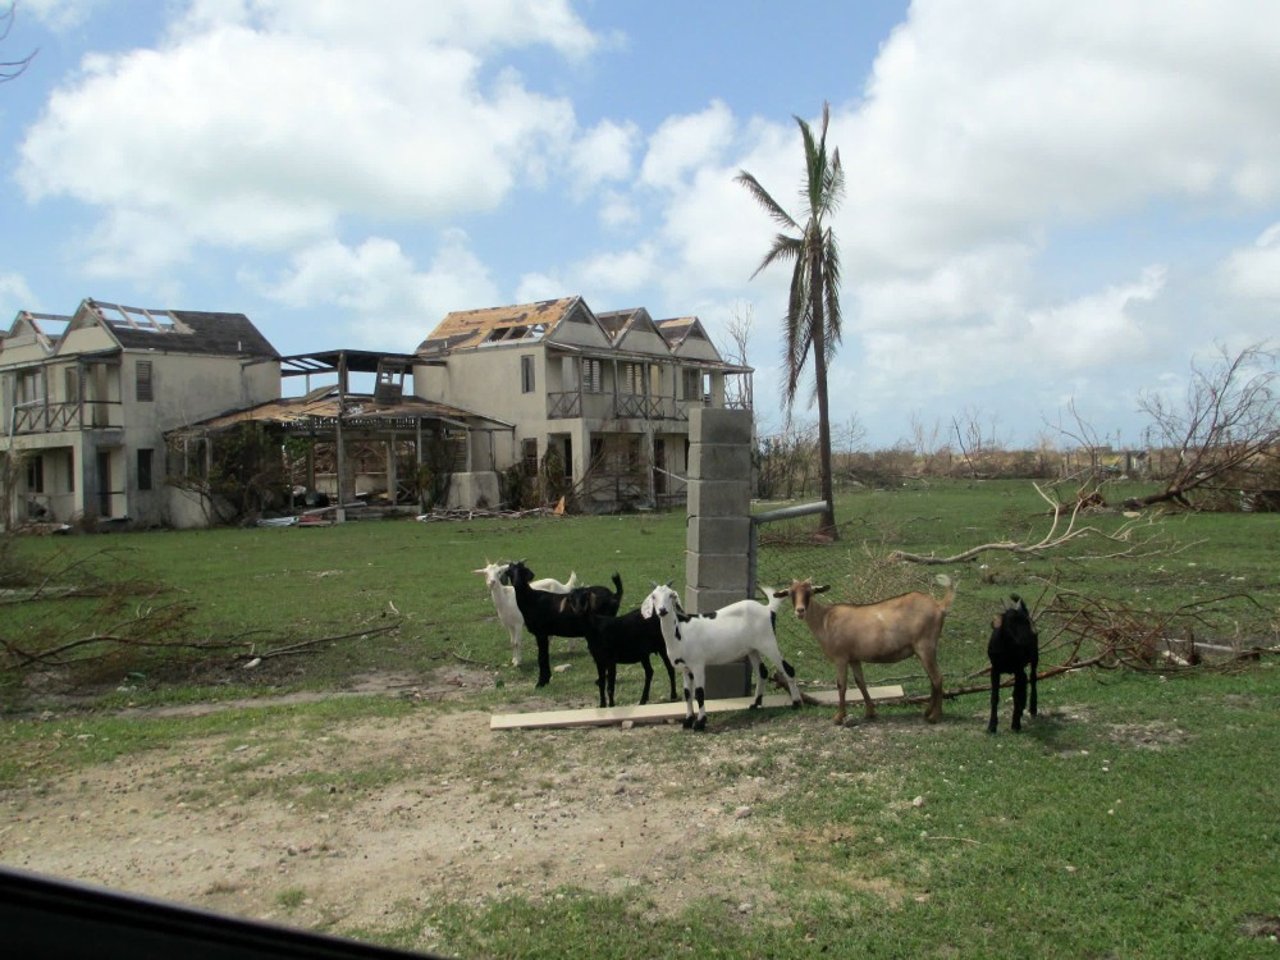 goats_forage_for_food_in_front_of_damaged_buildings_in_antigua_and_barbuda